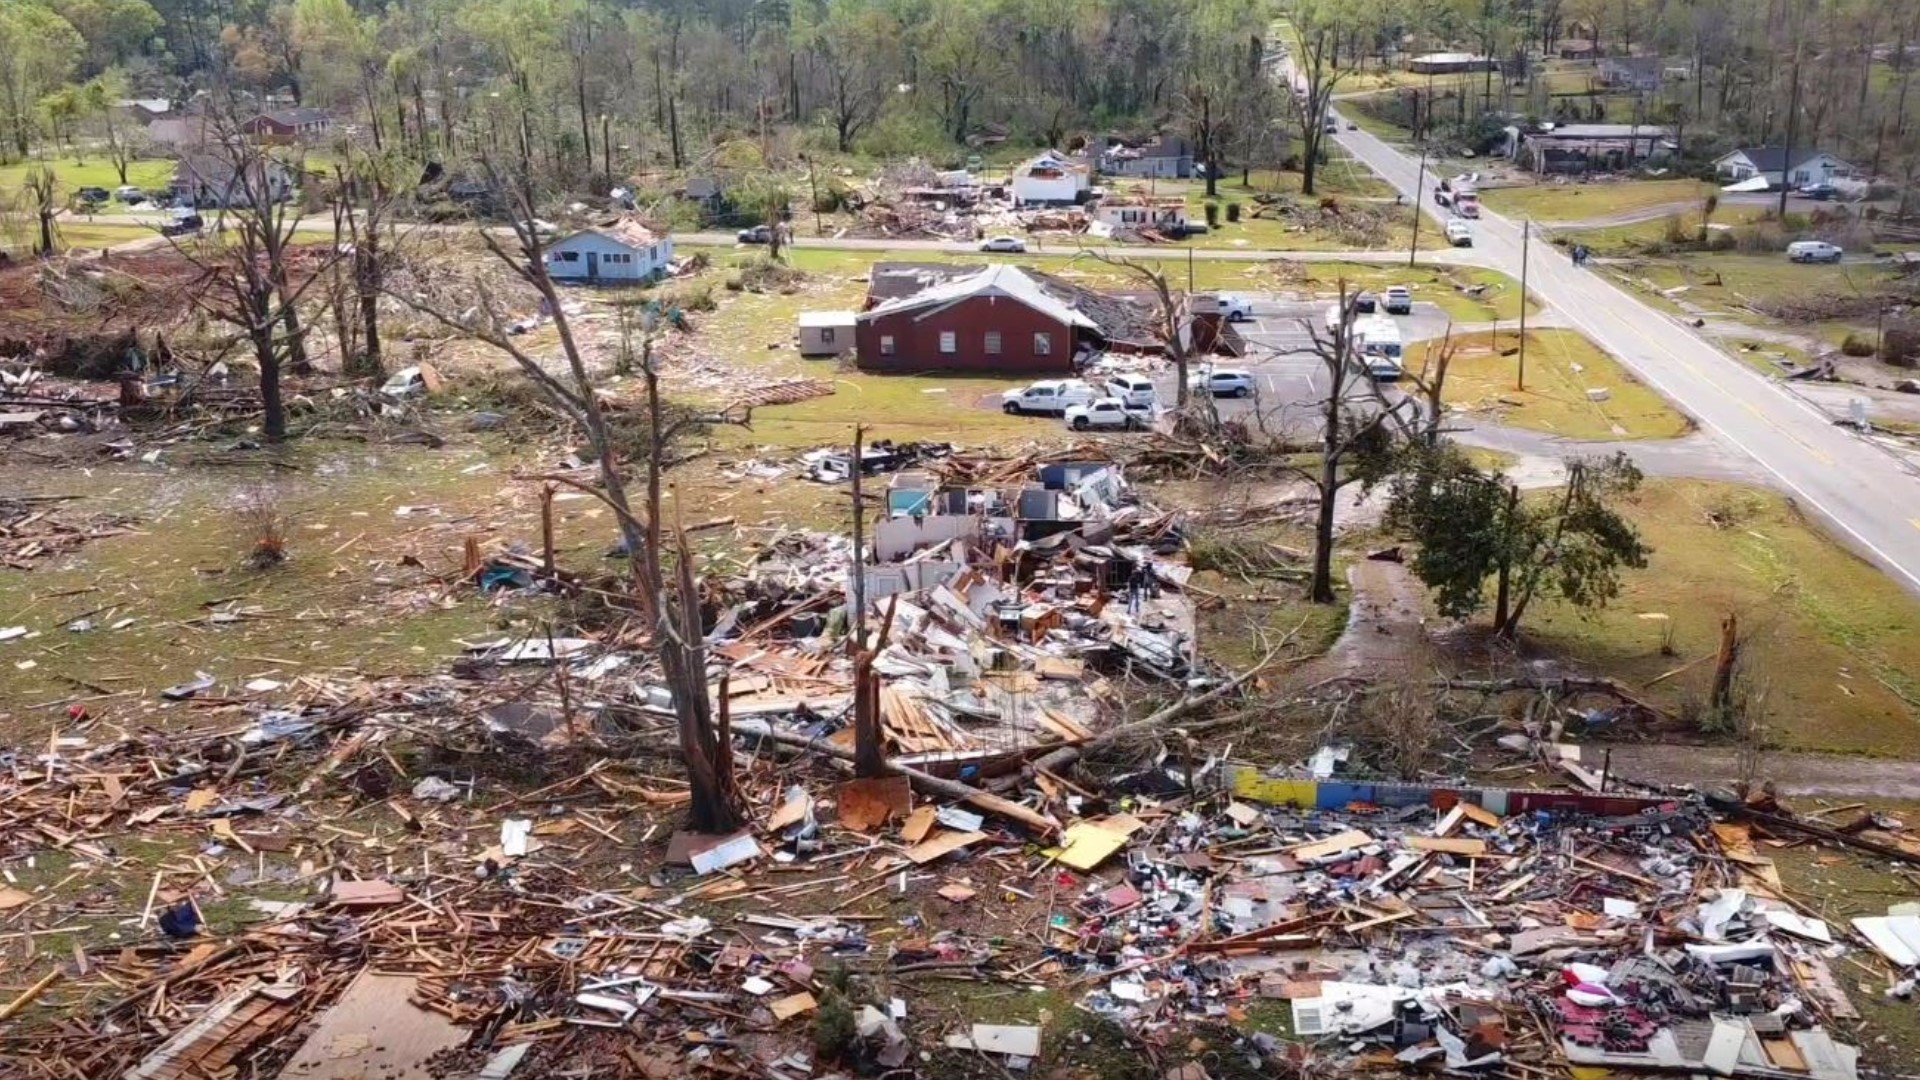 A tornado blew through Troup County near LaGrange early Sunday morning causing extensive damage to dozens of buildings.